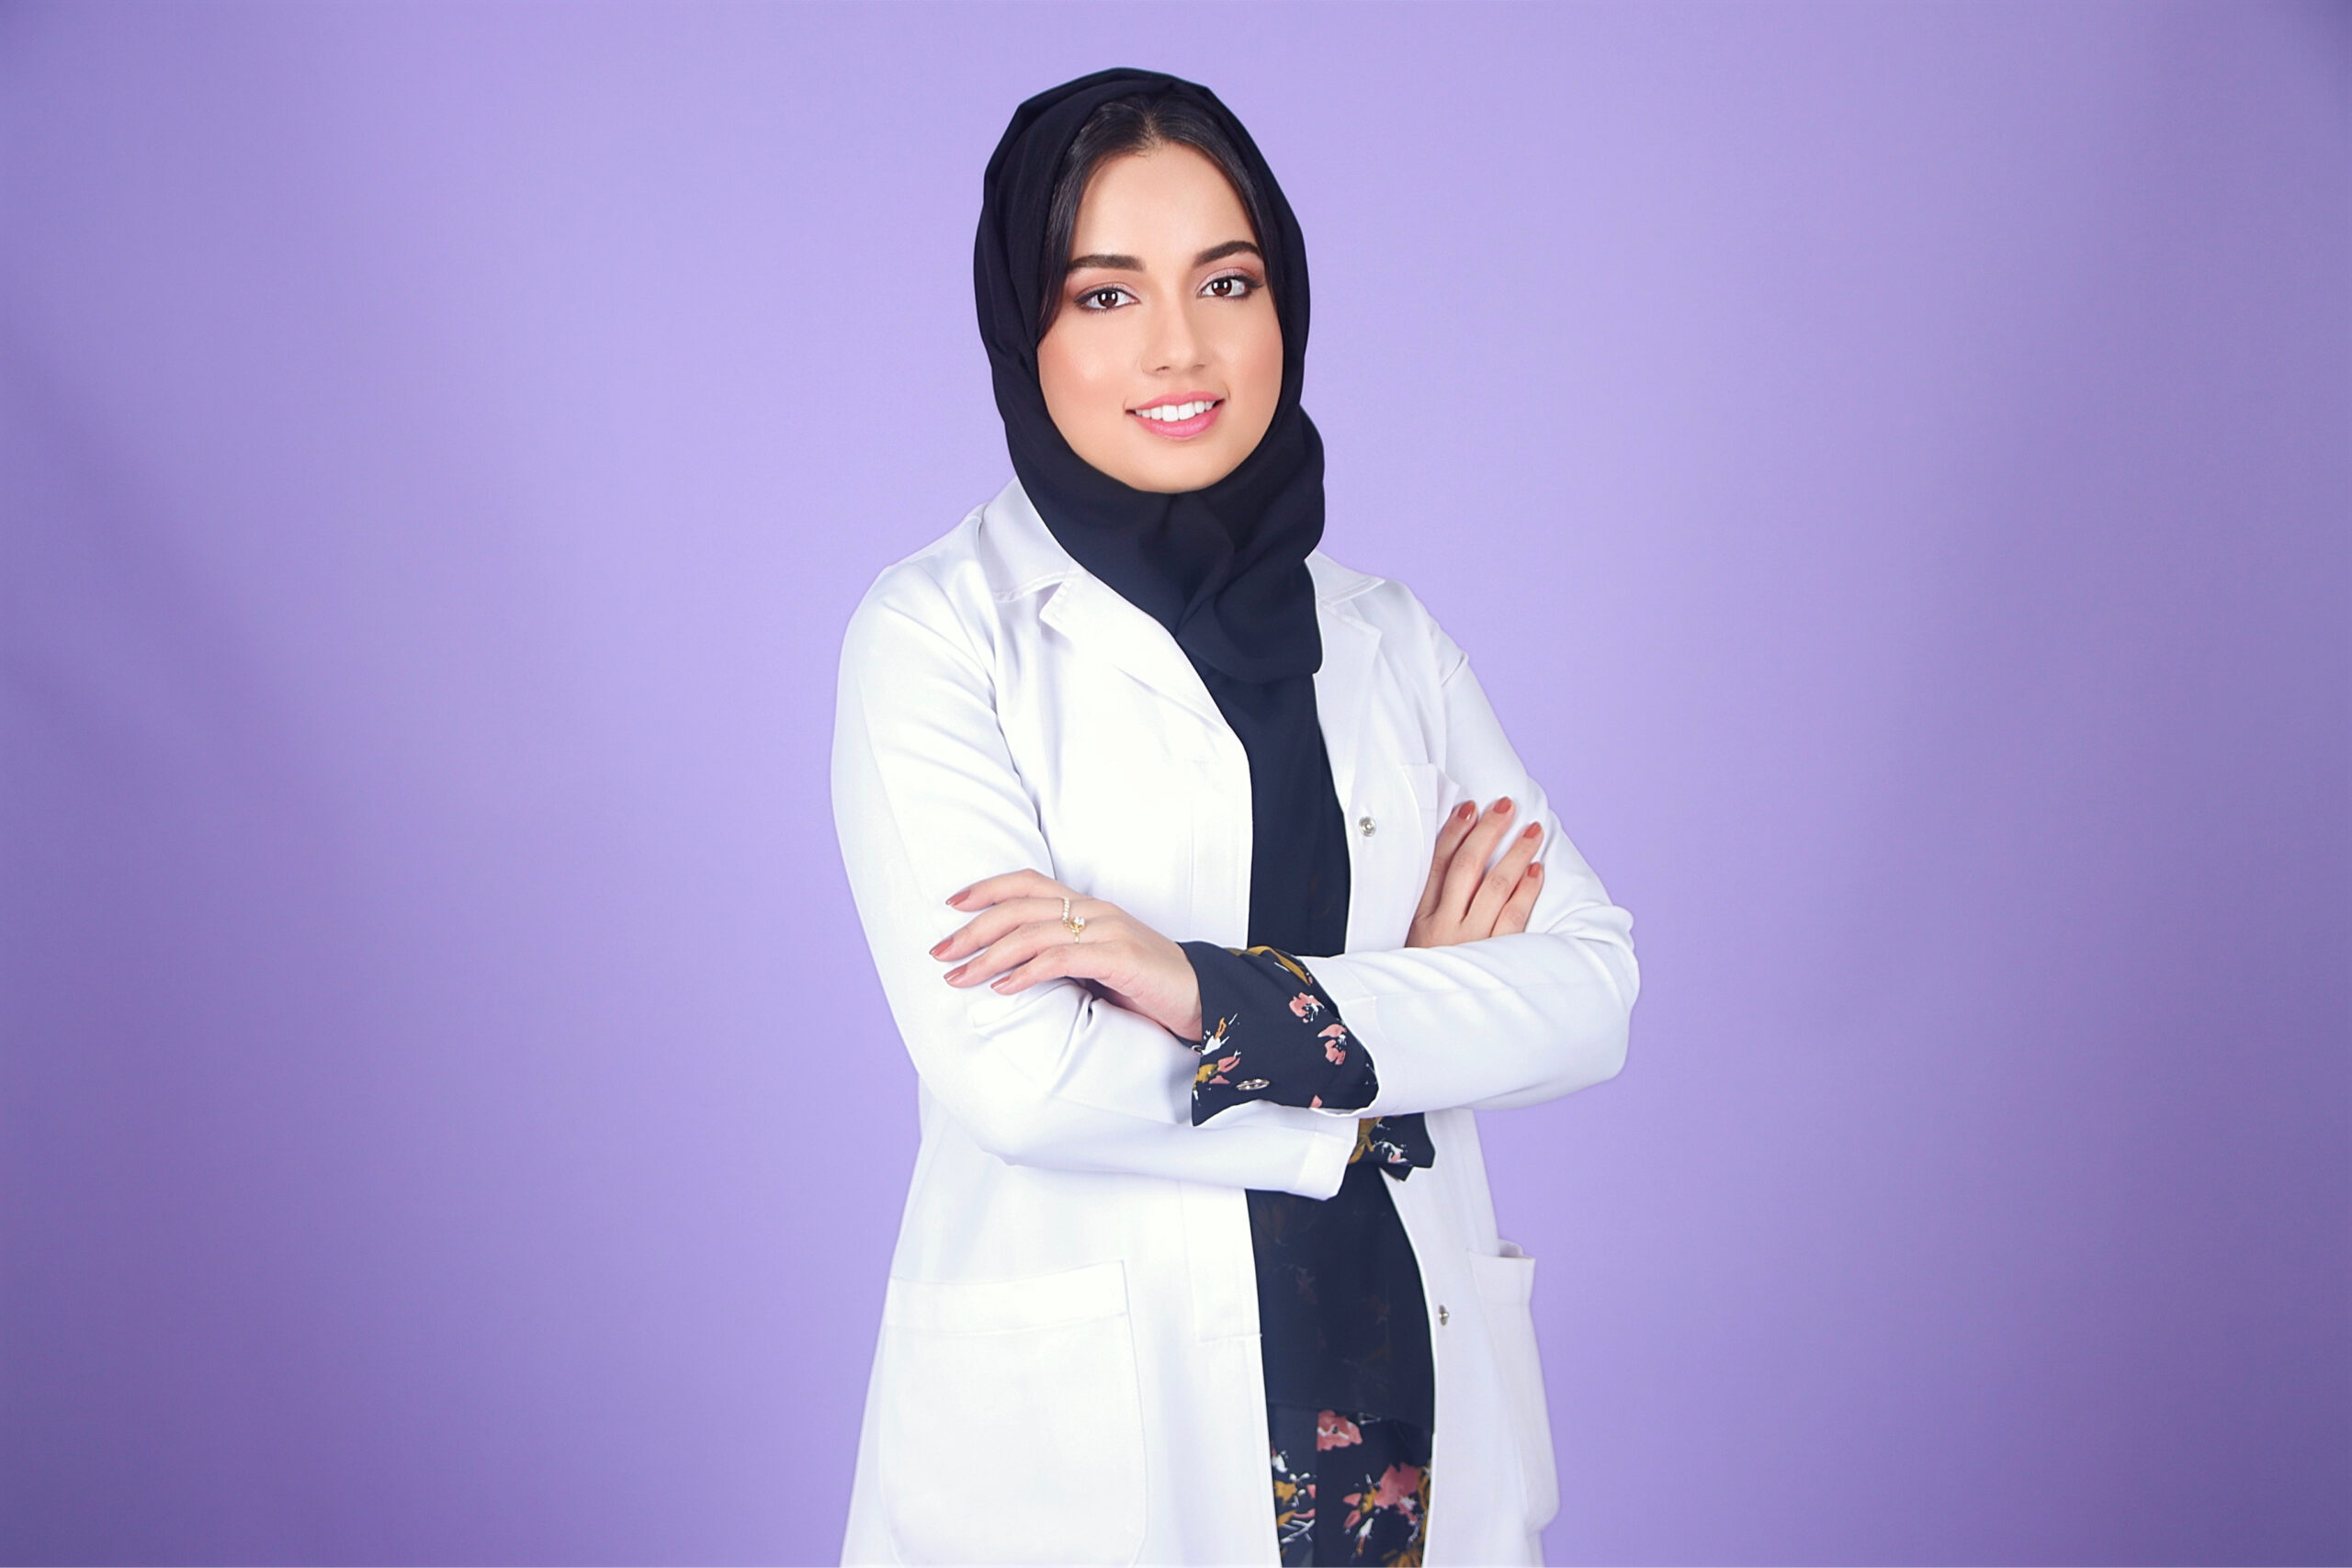 Dr. Sana Farid trains eyes on healthcare’s future with extended reality technology